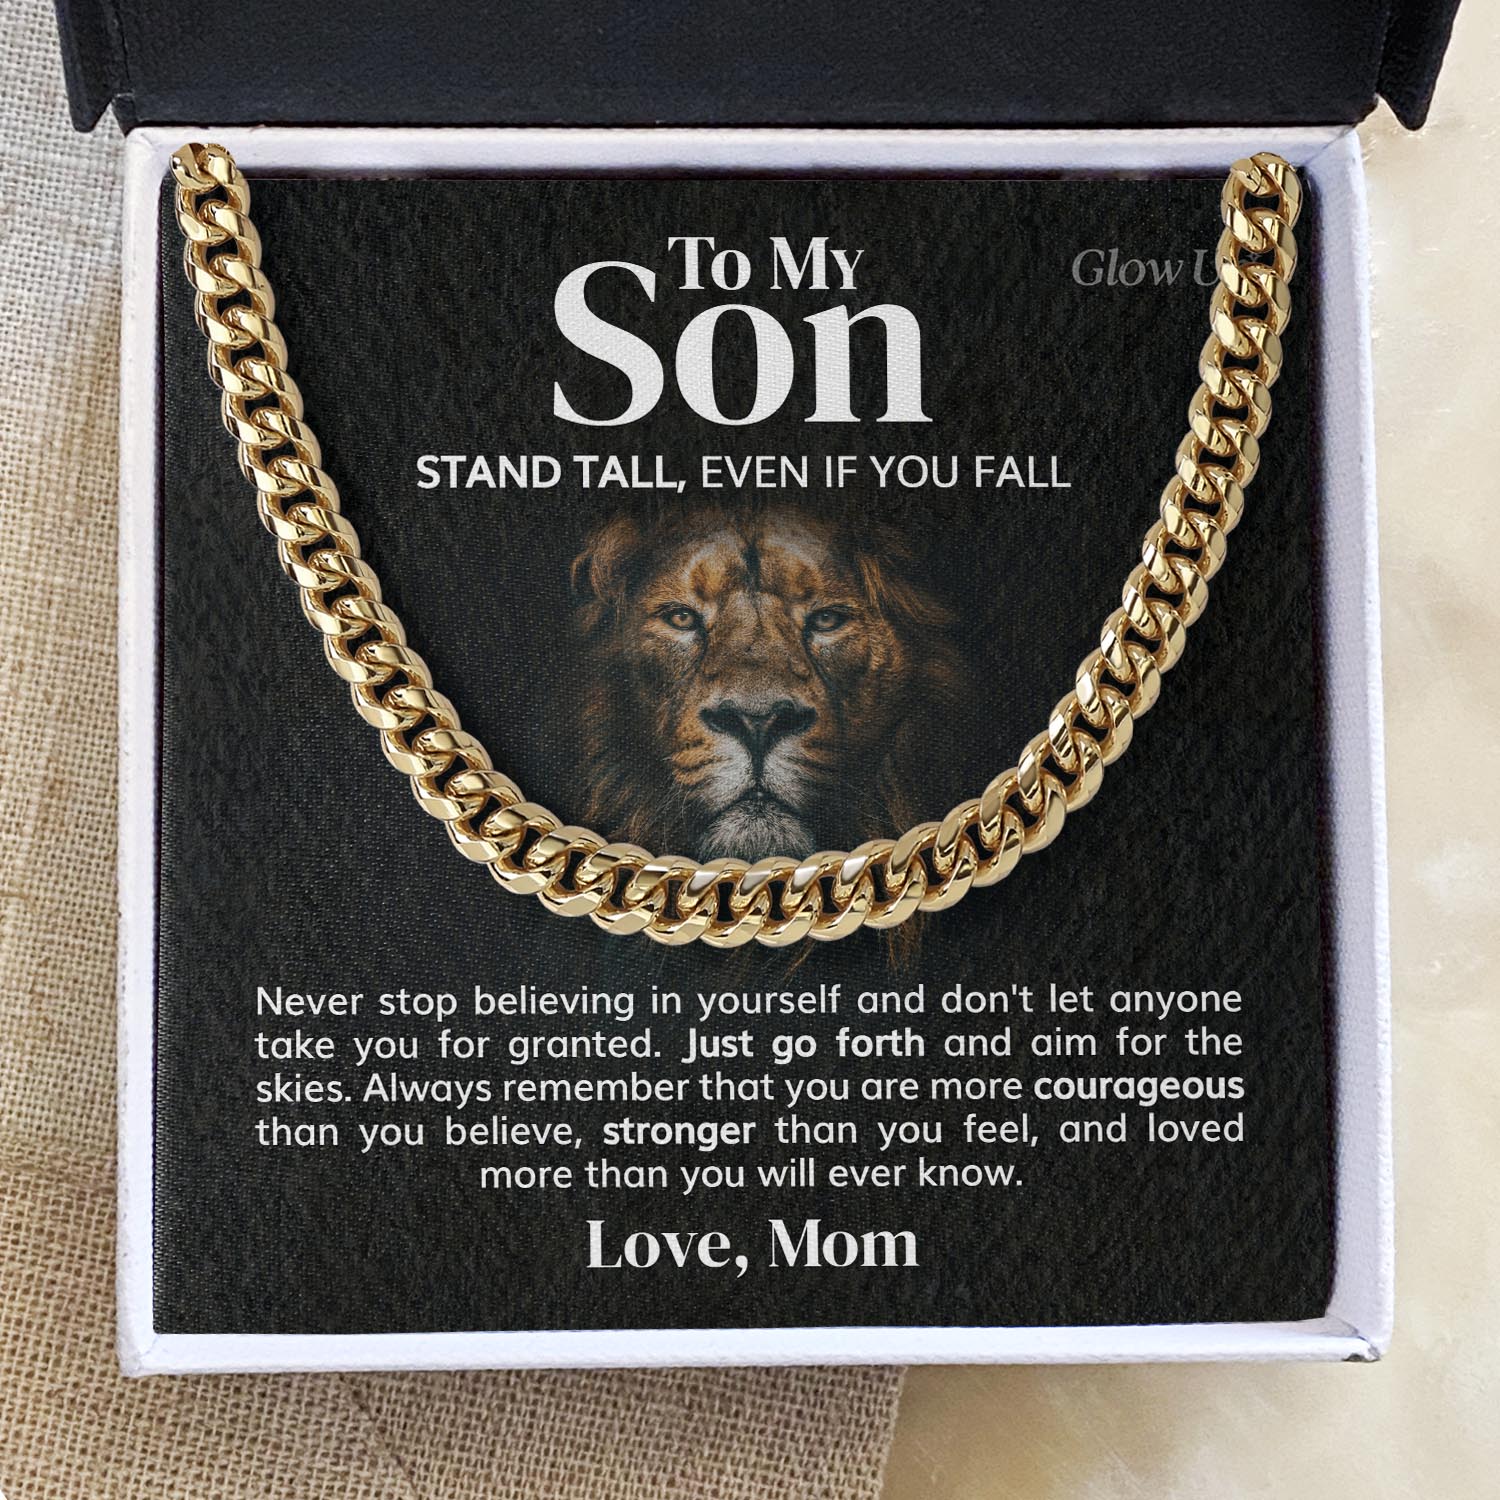 ShineOn Fulfillment Jewelry 14K Yellow Gold Finish / Two Toned Box To my son - Stand tall my son - Cuban Link Chain